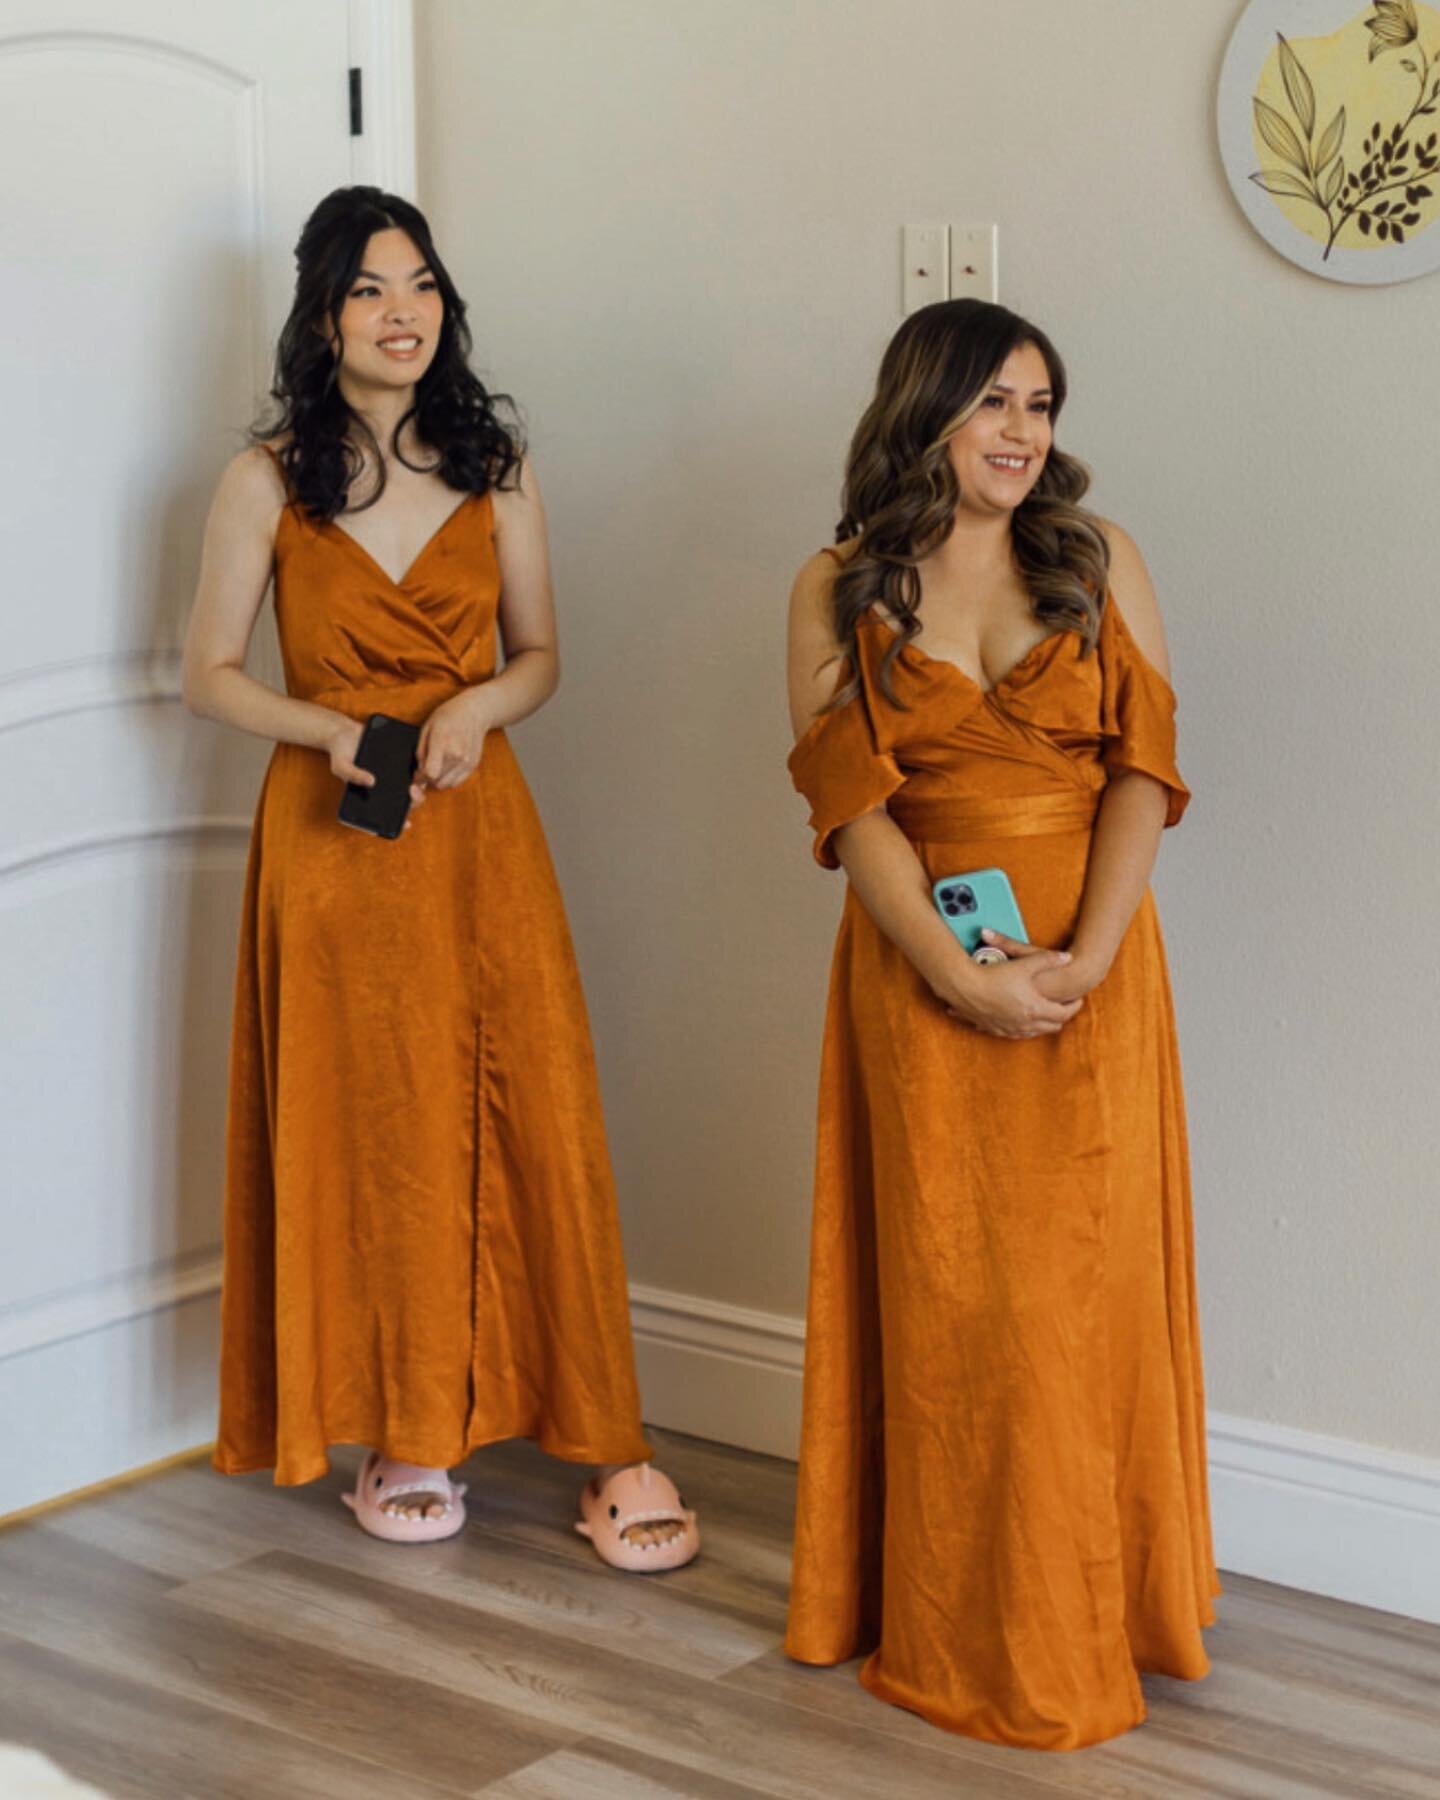 Love the color, love the dresses, love these sweet bridesmaids! The icing on the cake? Those super cool shark slippers!! 😆

🦈: @hello_slippers 
📸: @breewalkerphotography 
💄: @pmastyle 

#supercoolbridesmaids #weddingcoordinator #weddingplanning #